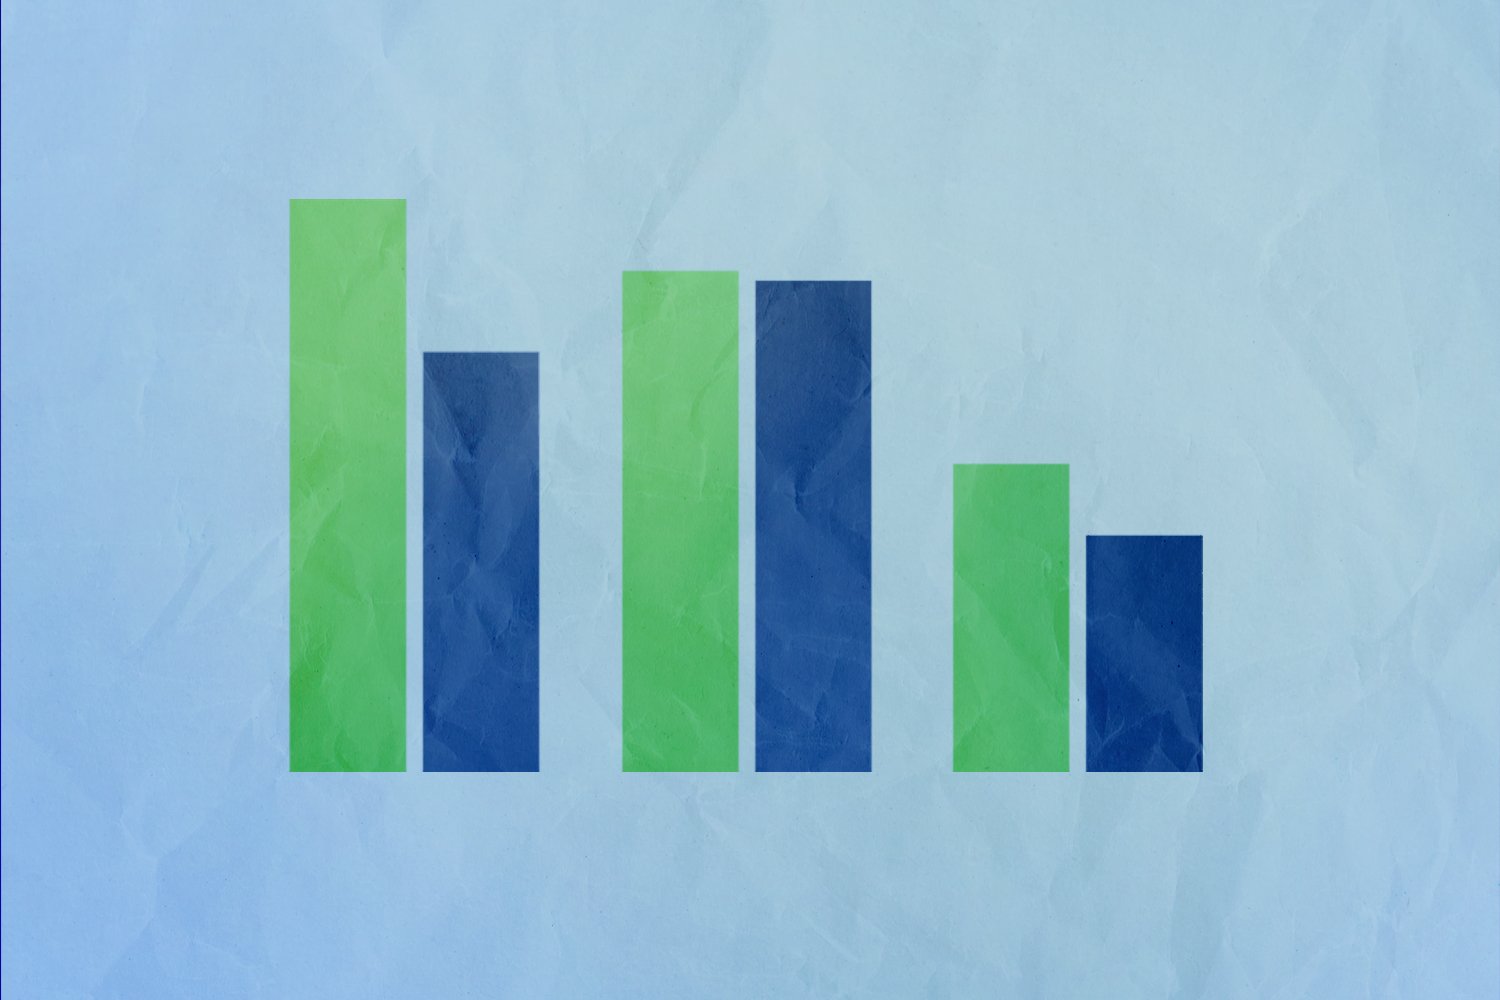 An illustration with a light blue back drop and a bar chart in green and dark blue on top.